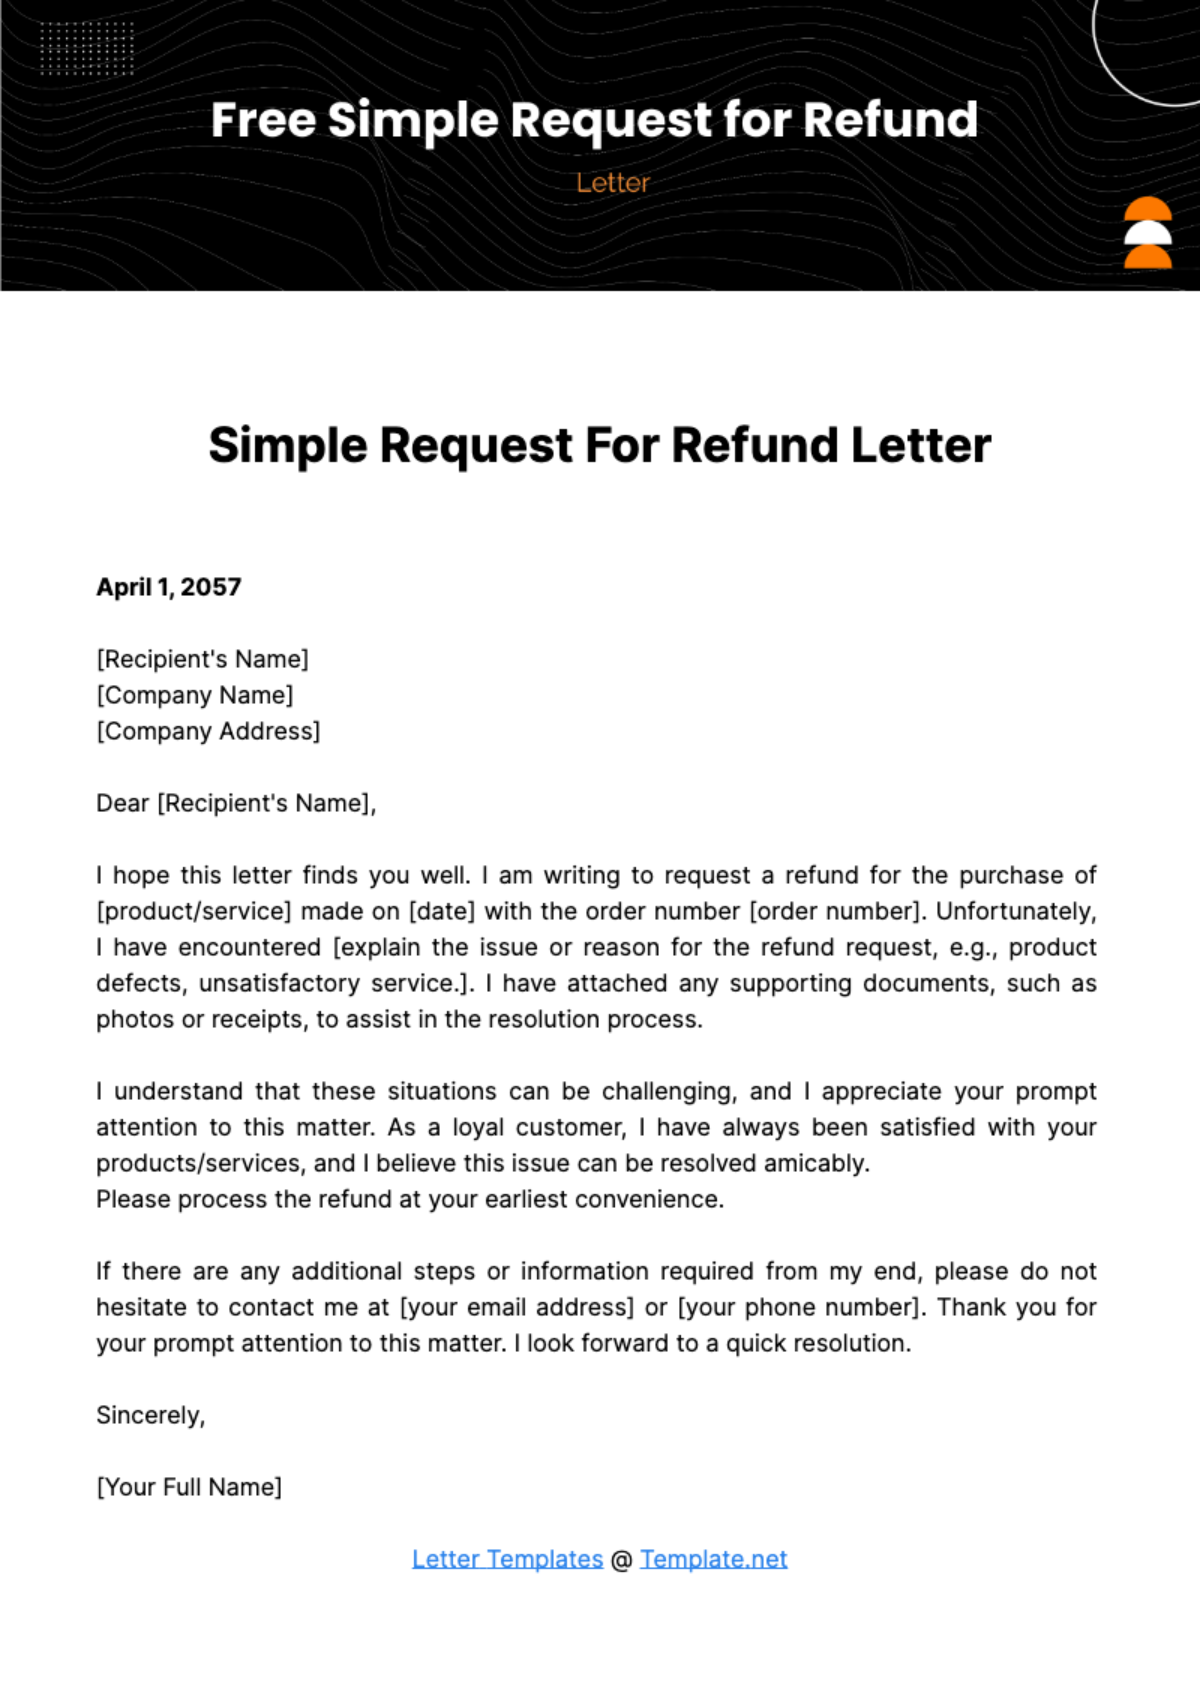 Free Simple Request for Refund Letter Template